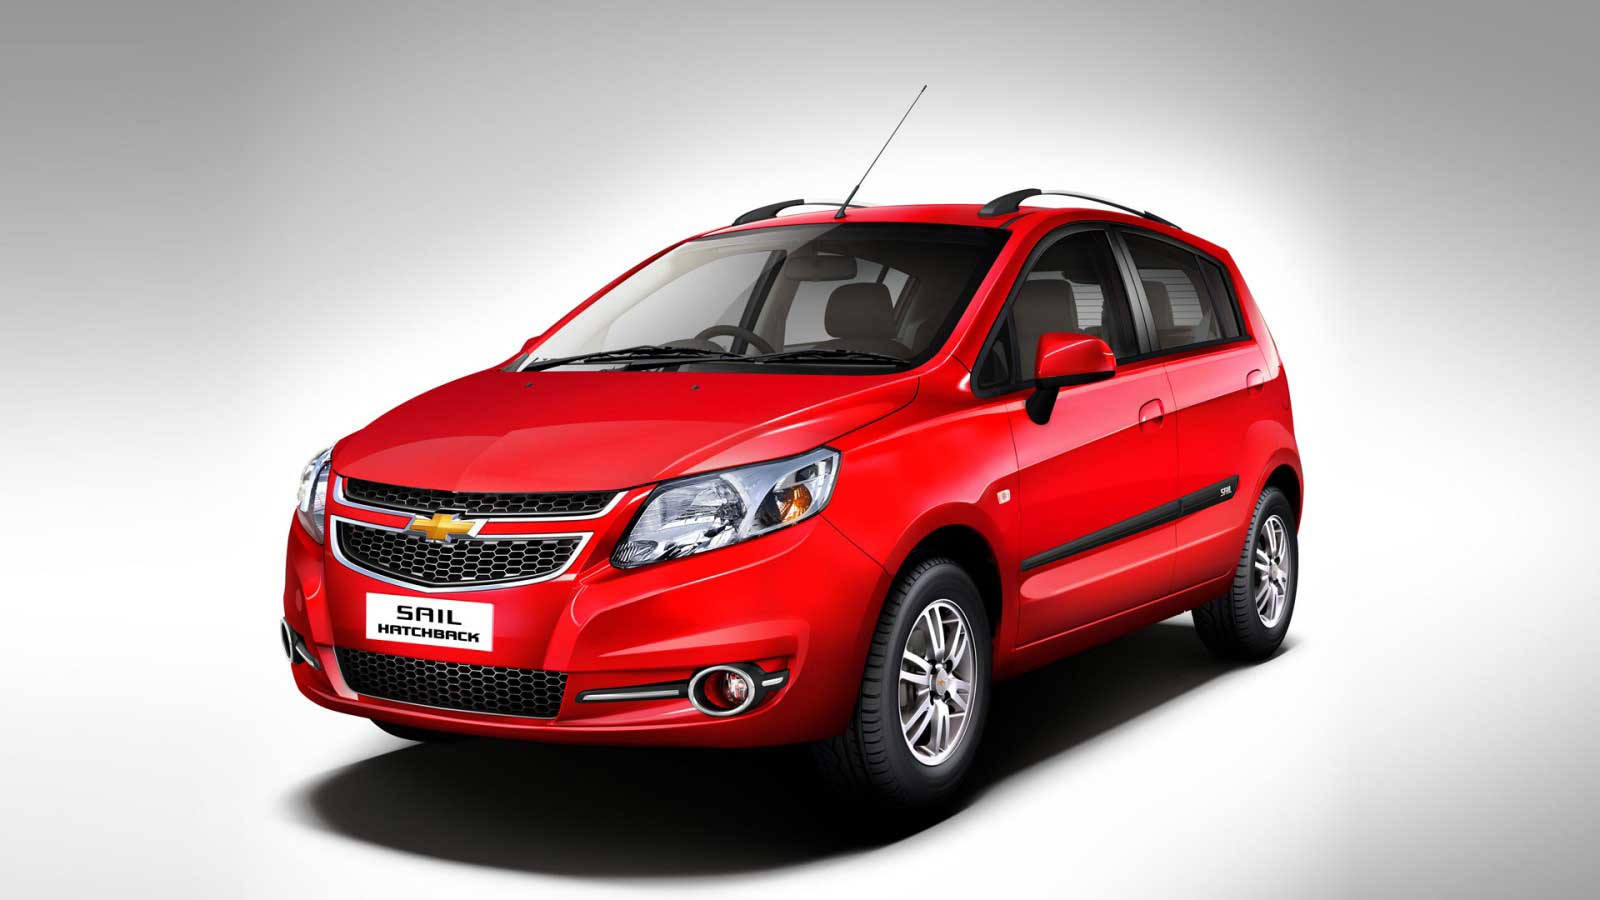 Chevrolet Sail Hatchback 1.2 LS ABS Exterior front cross view